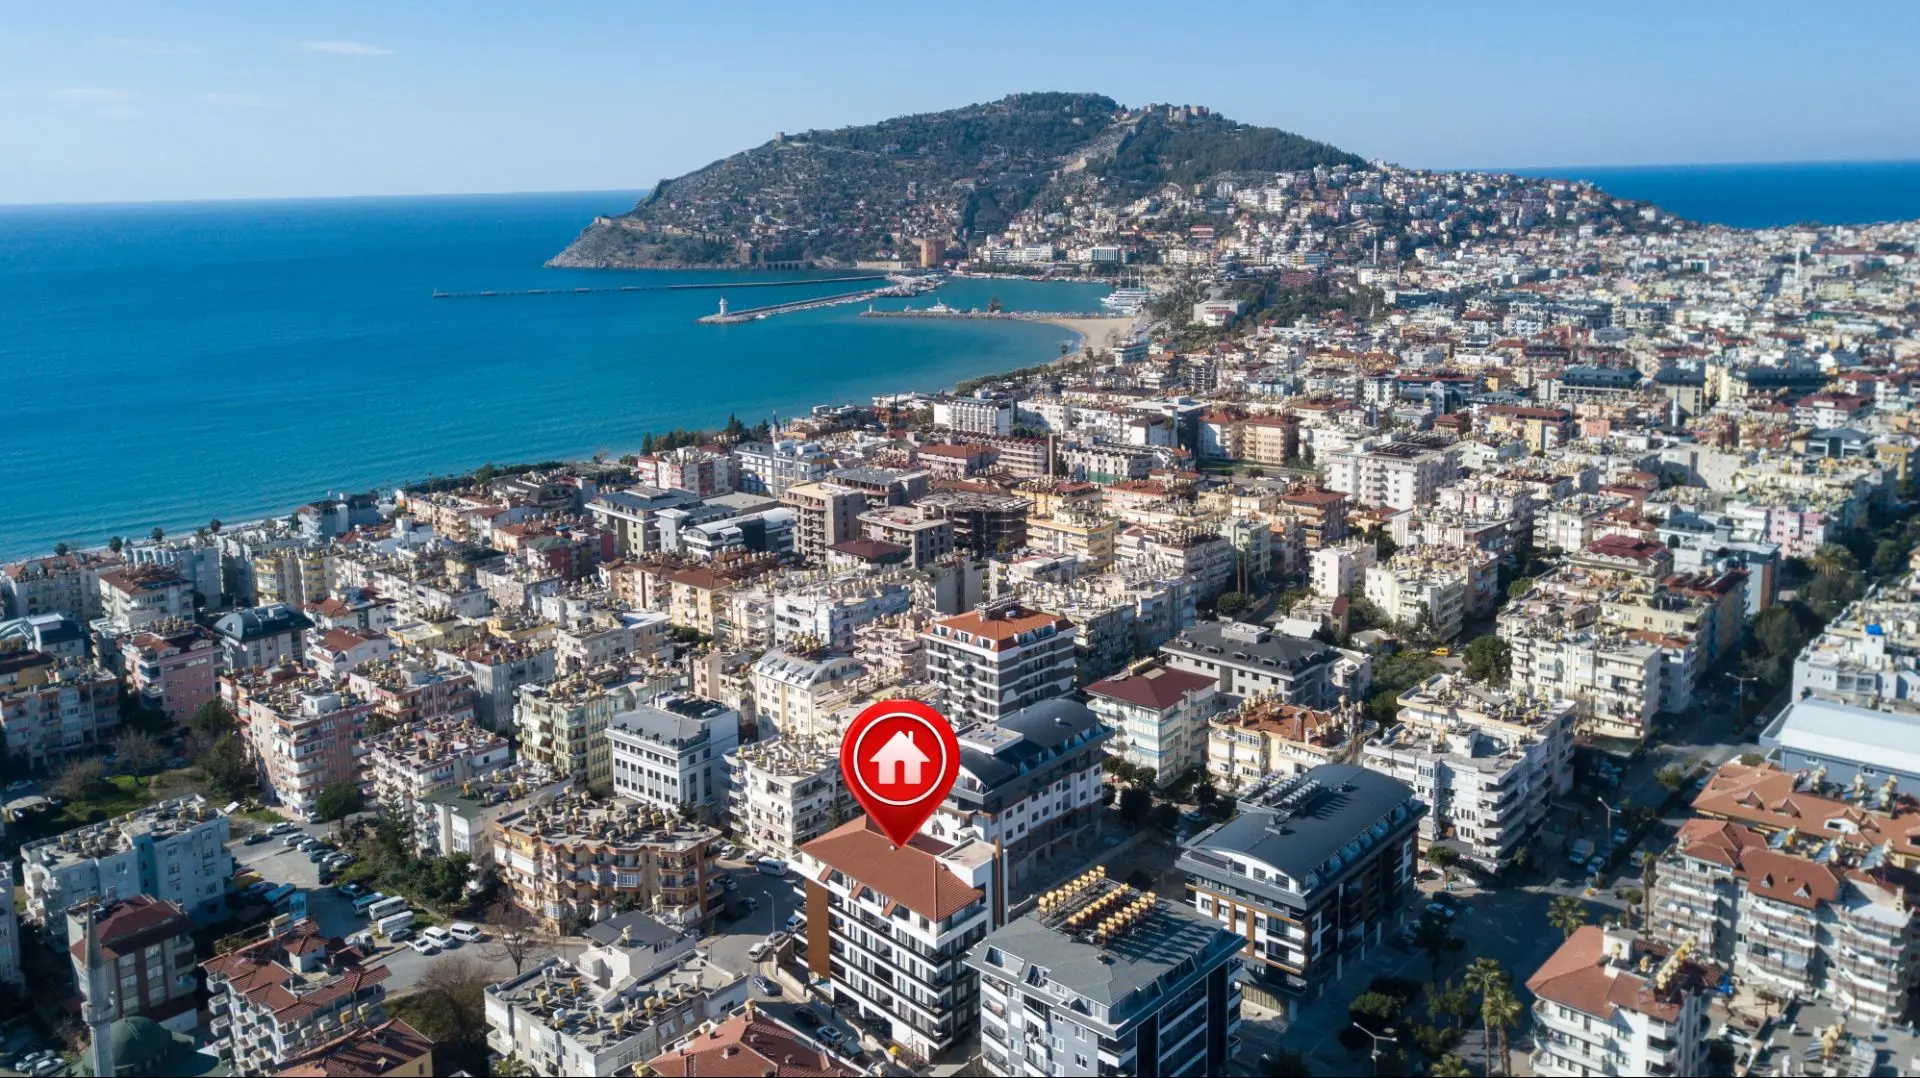 SPACIOUS 2+1 DUPLEX FLAT IN ALANYA CENTER - ONLY 300 M TO THE SEA